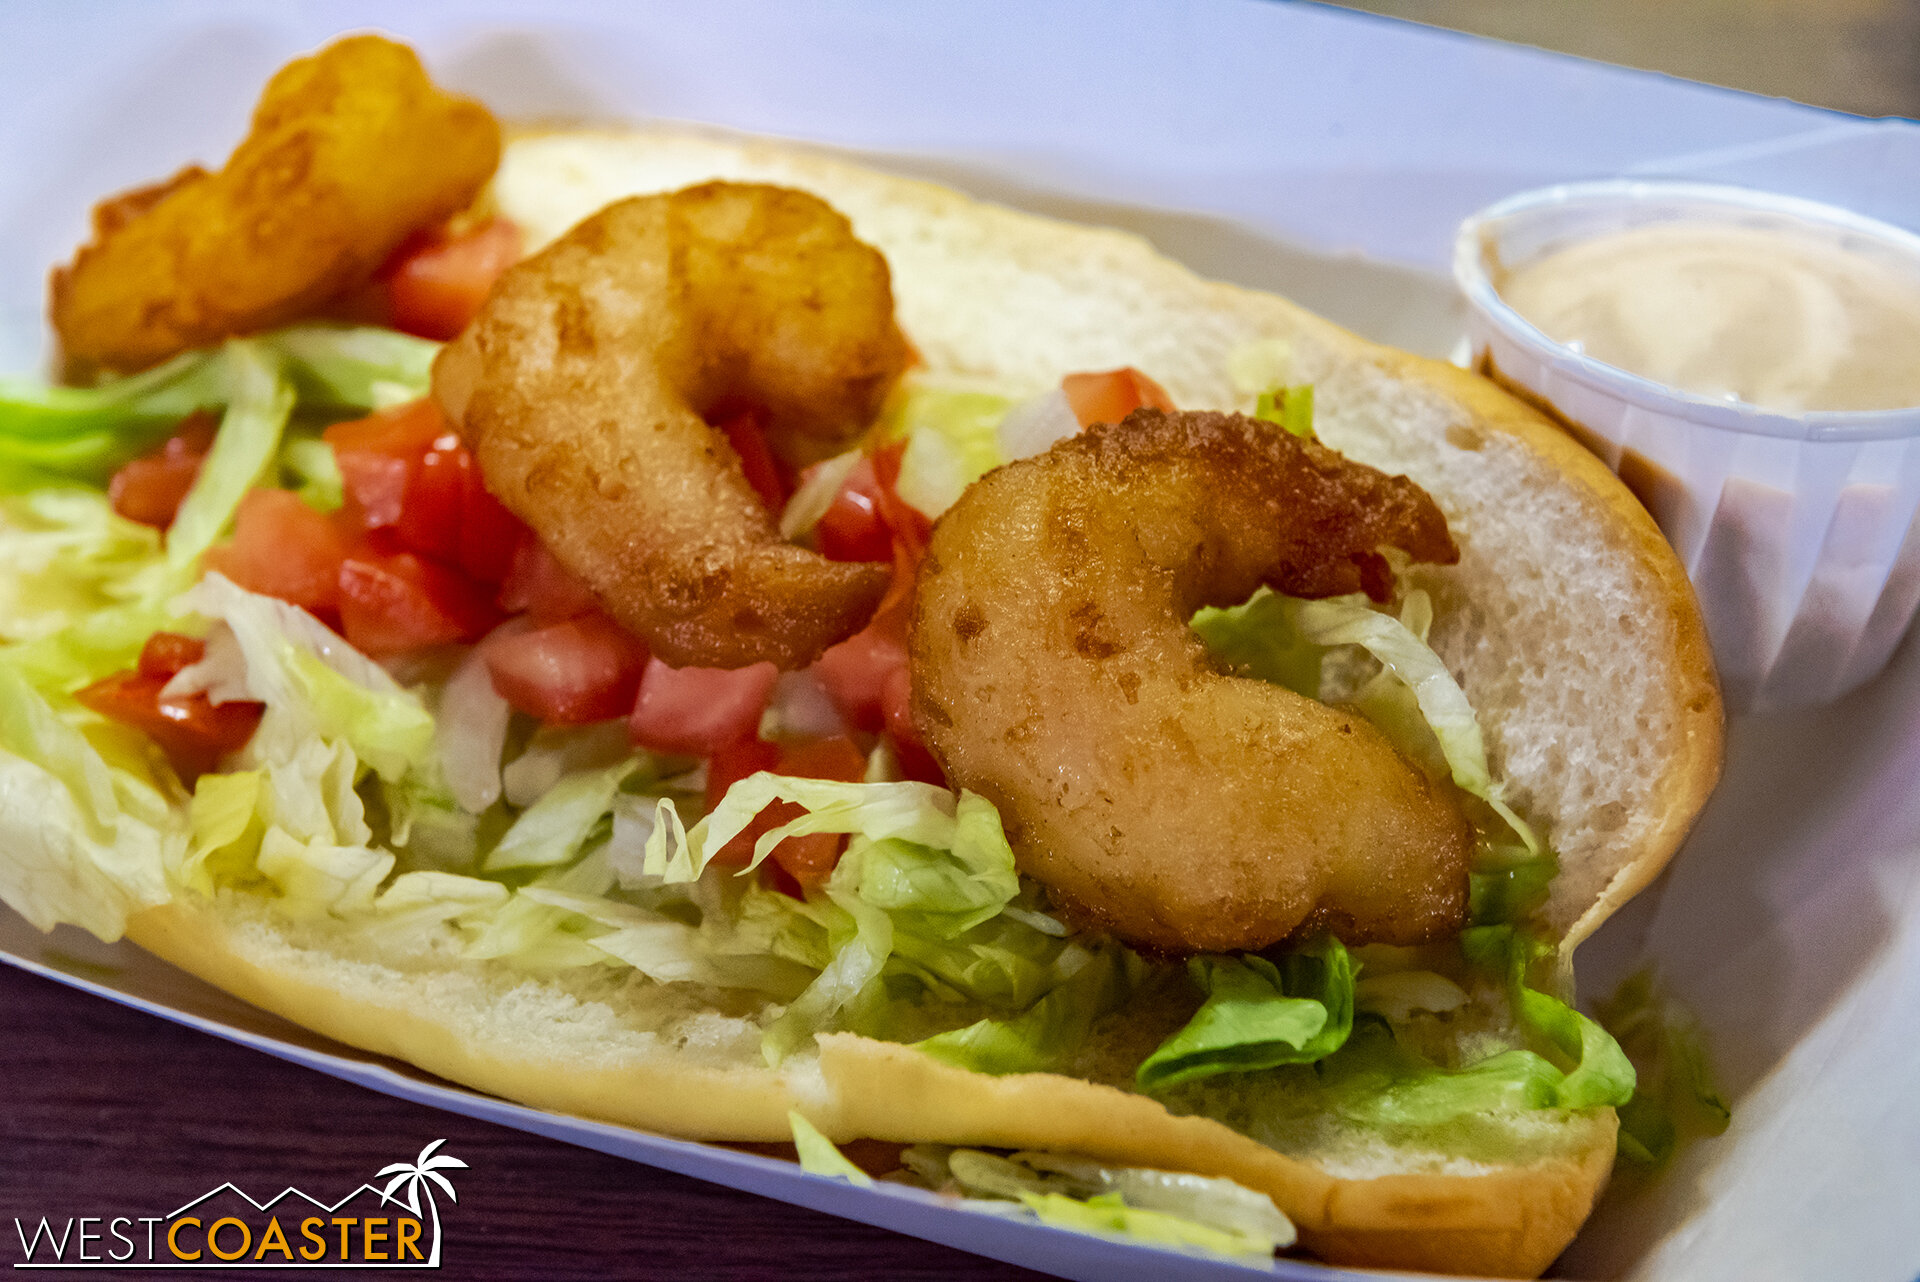  Shrimp Po’ Boy with Shredded Lettuce, Tomatoes, and Chipotle Crema, from Sutter’s Grill. 